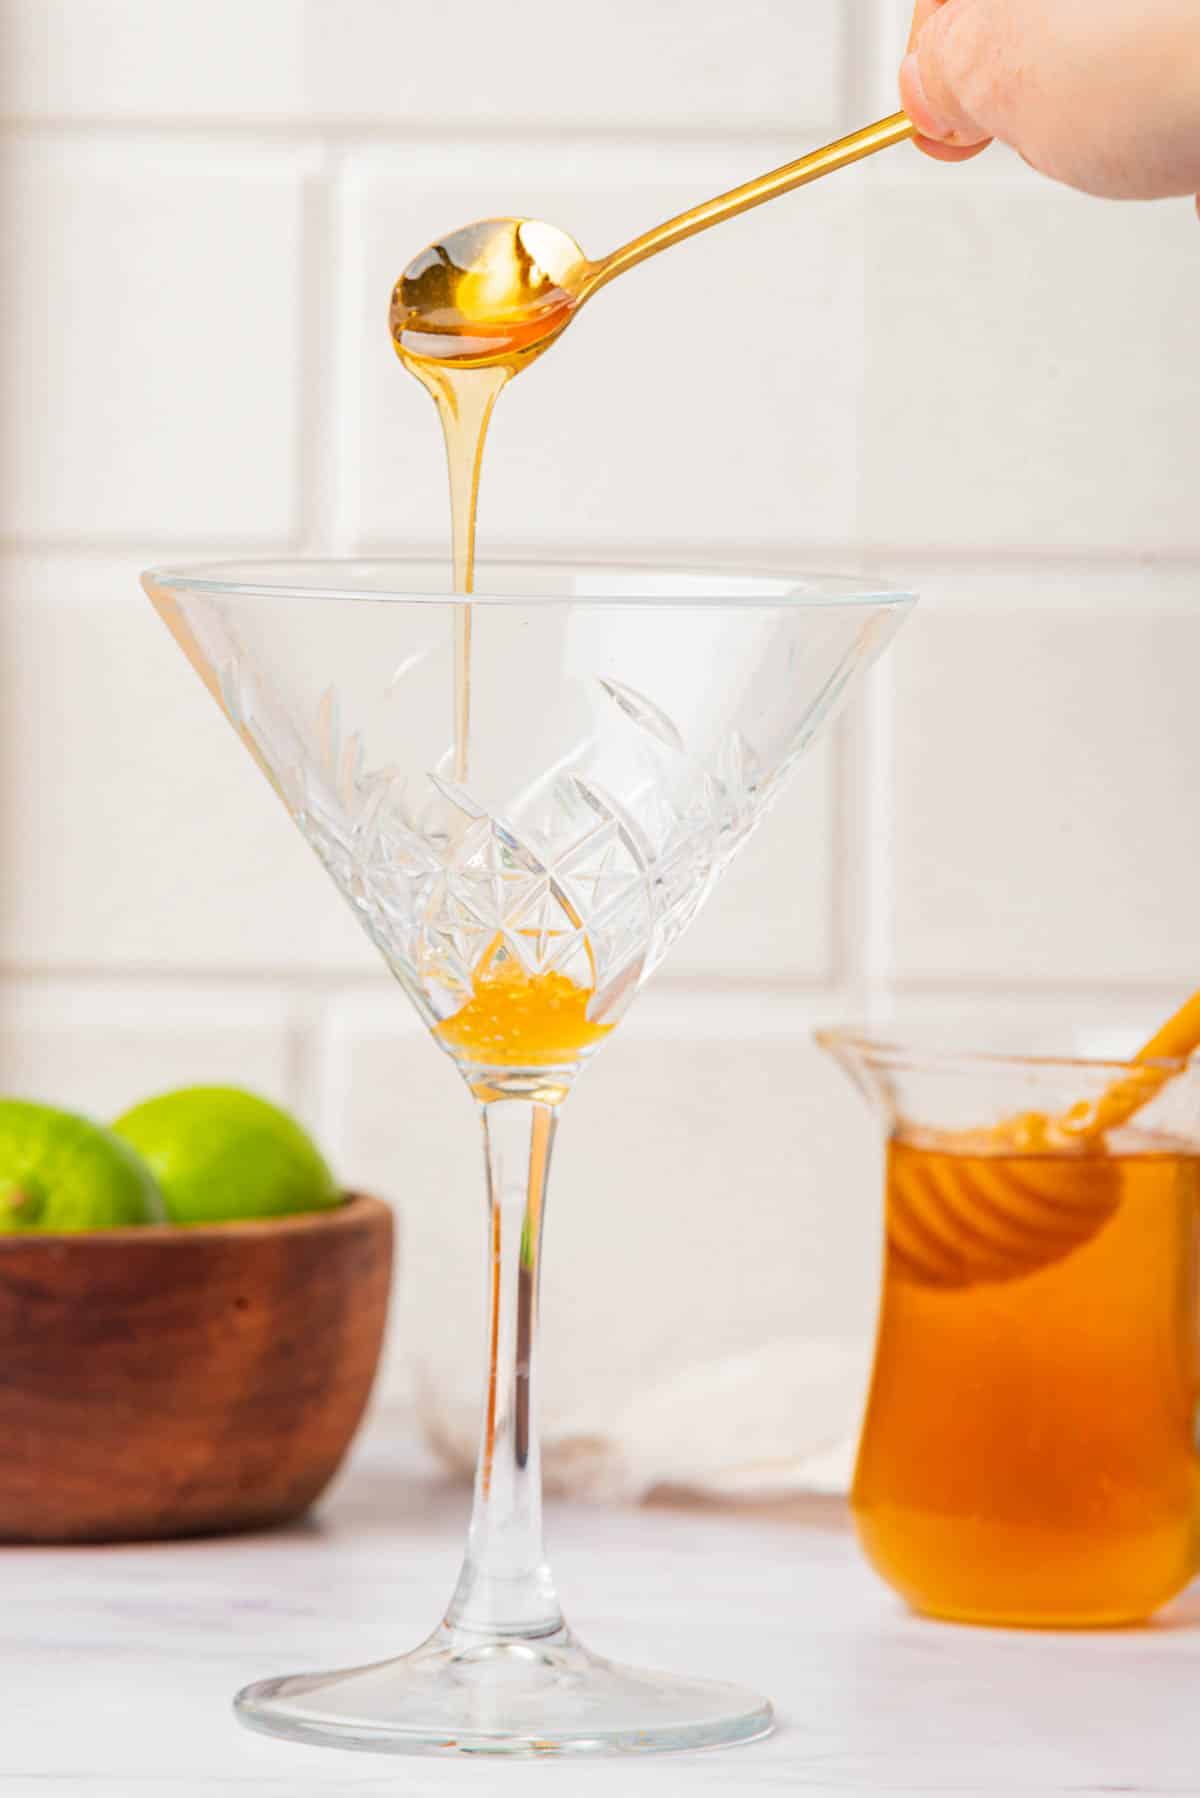 Pouring honey into a martini glass with honey and limes in background.